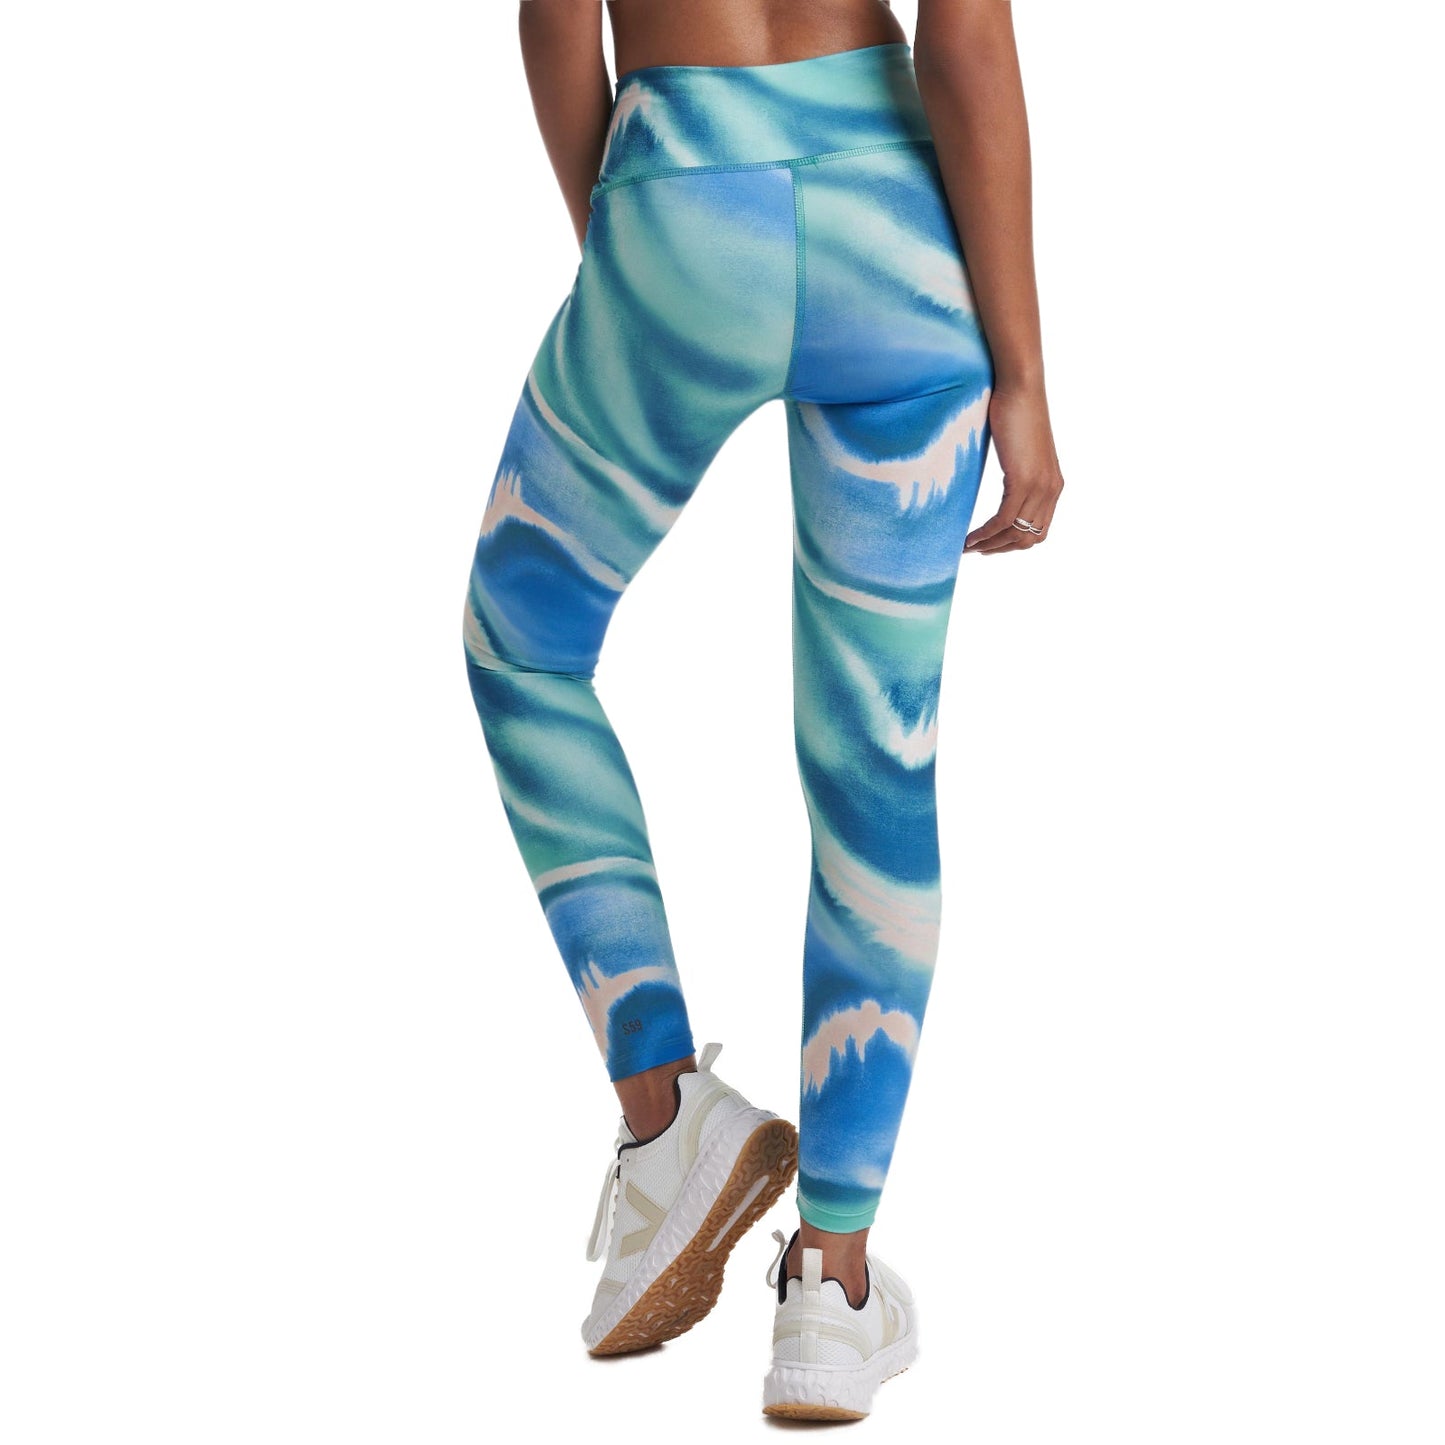 SPLITS59 Women's High Waist Moister Wicking Marbled Print Bardot Leggings and Top Collection